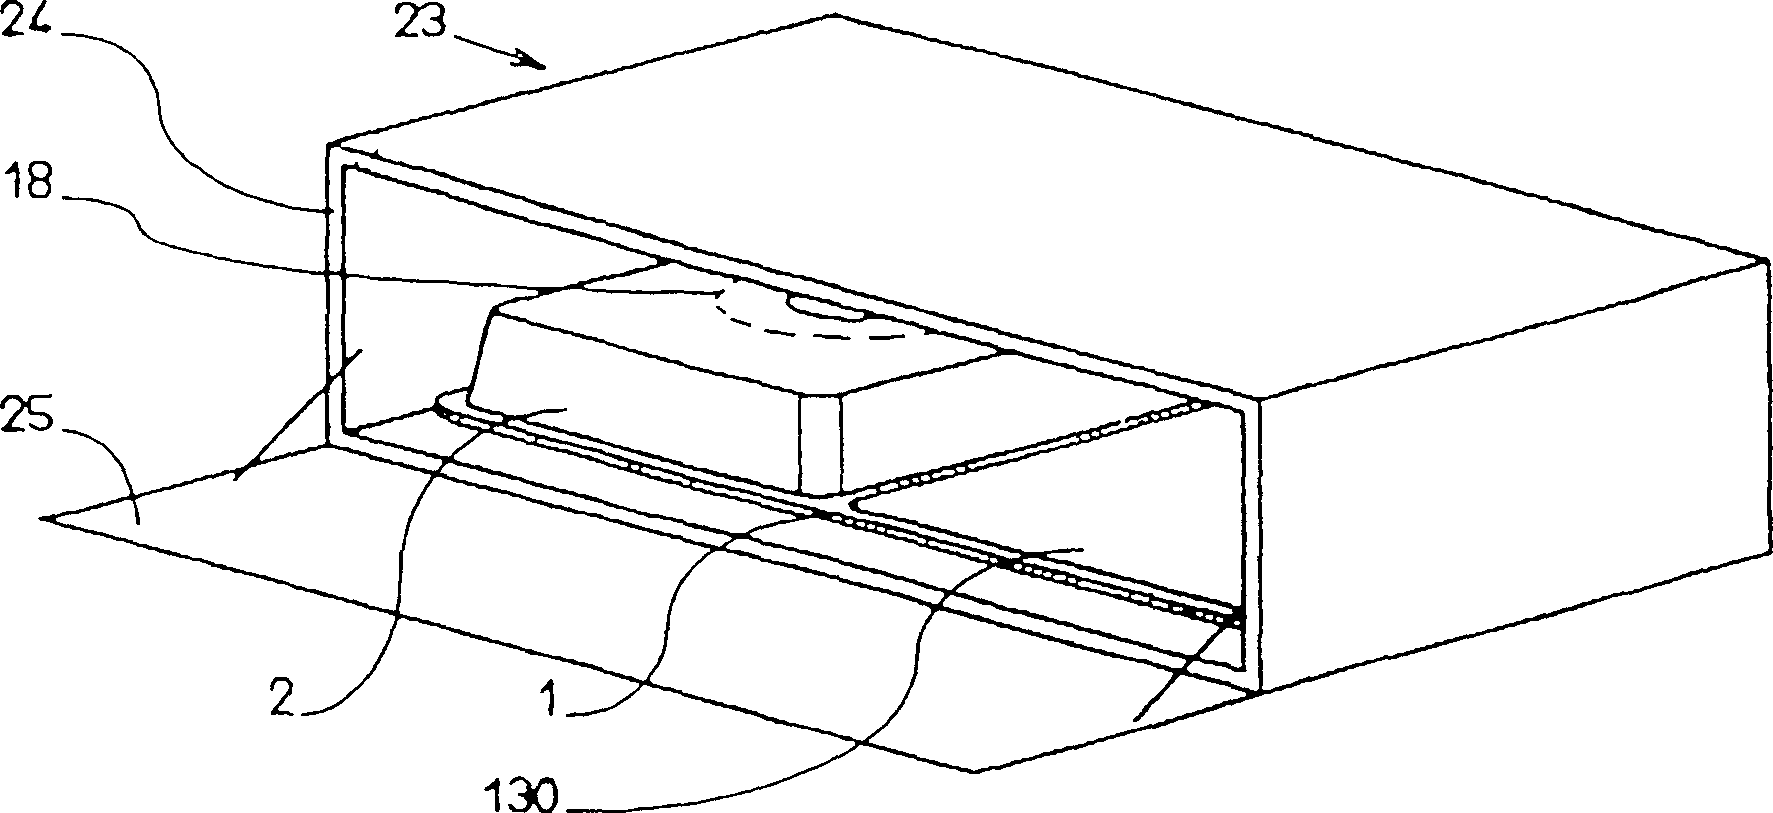 Method and device for instituional distribution of meals